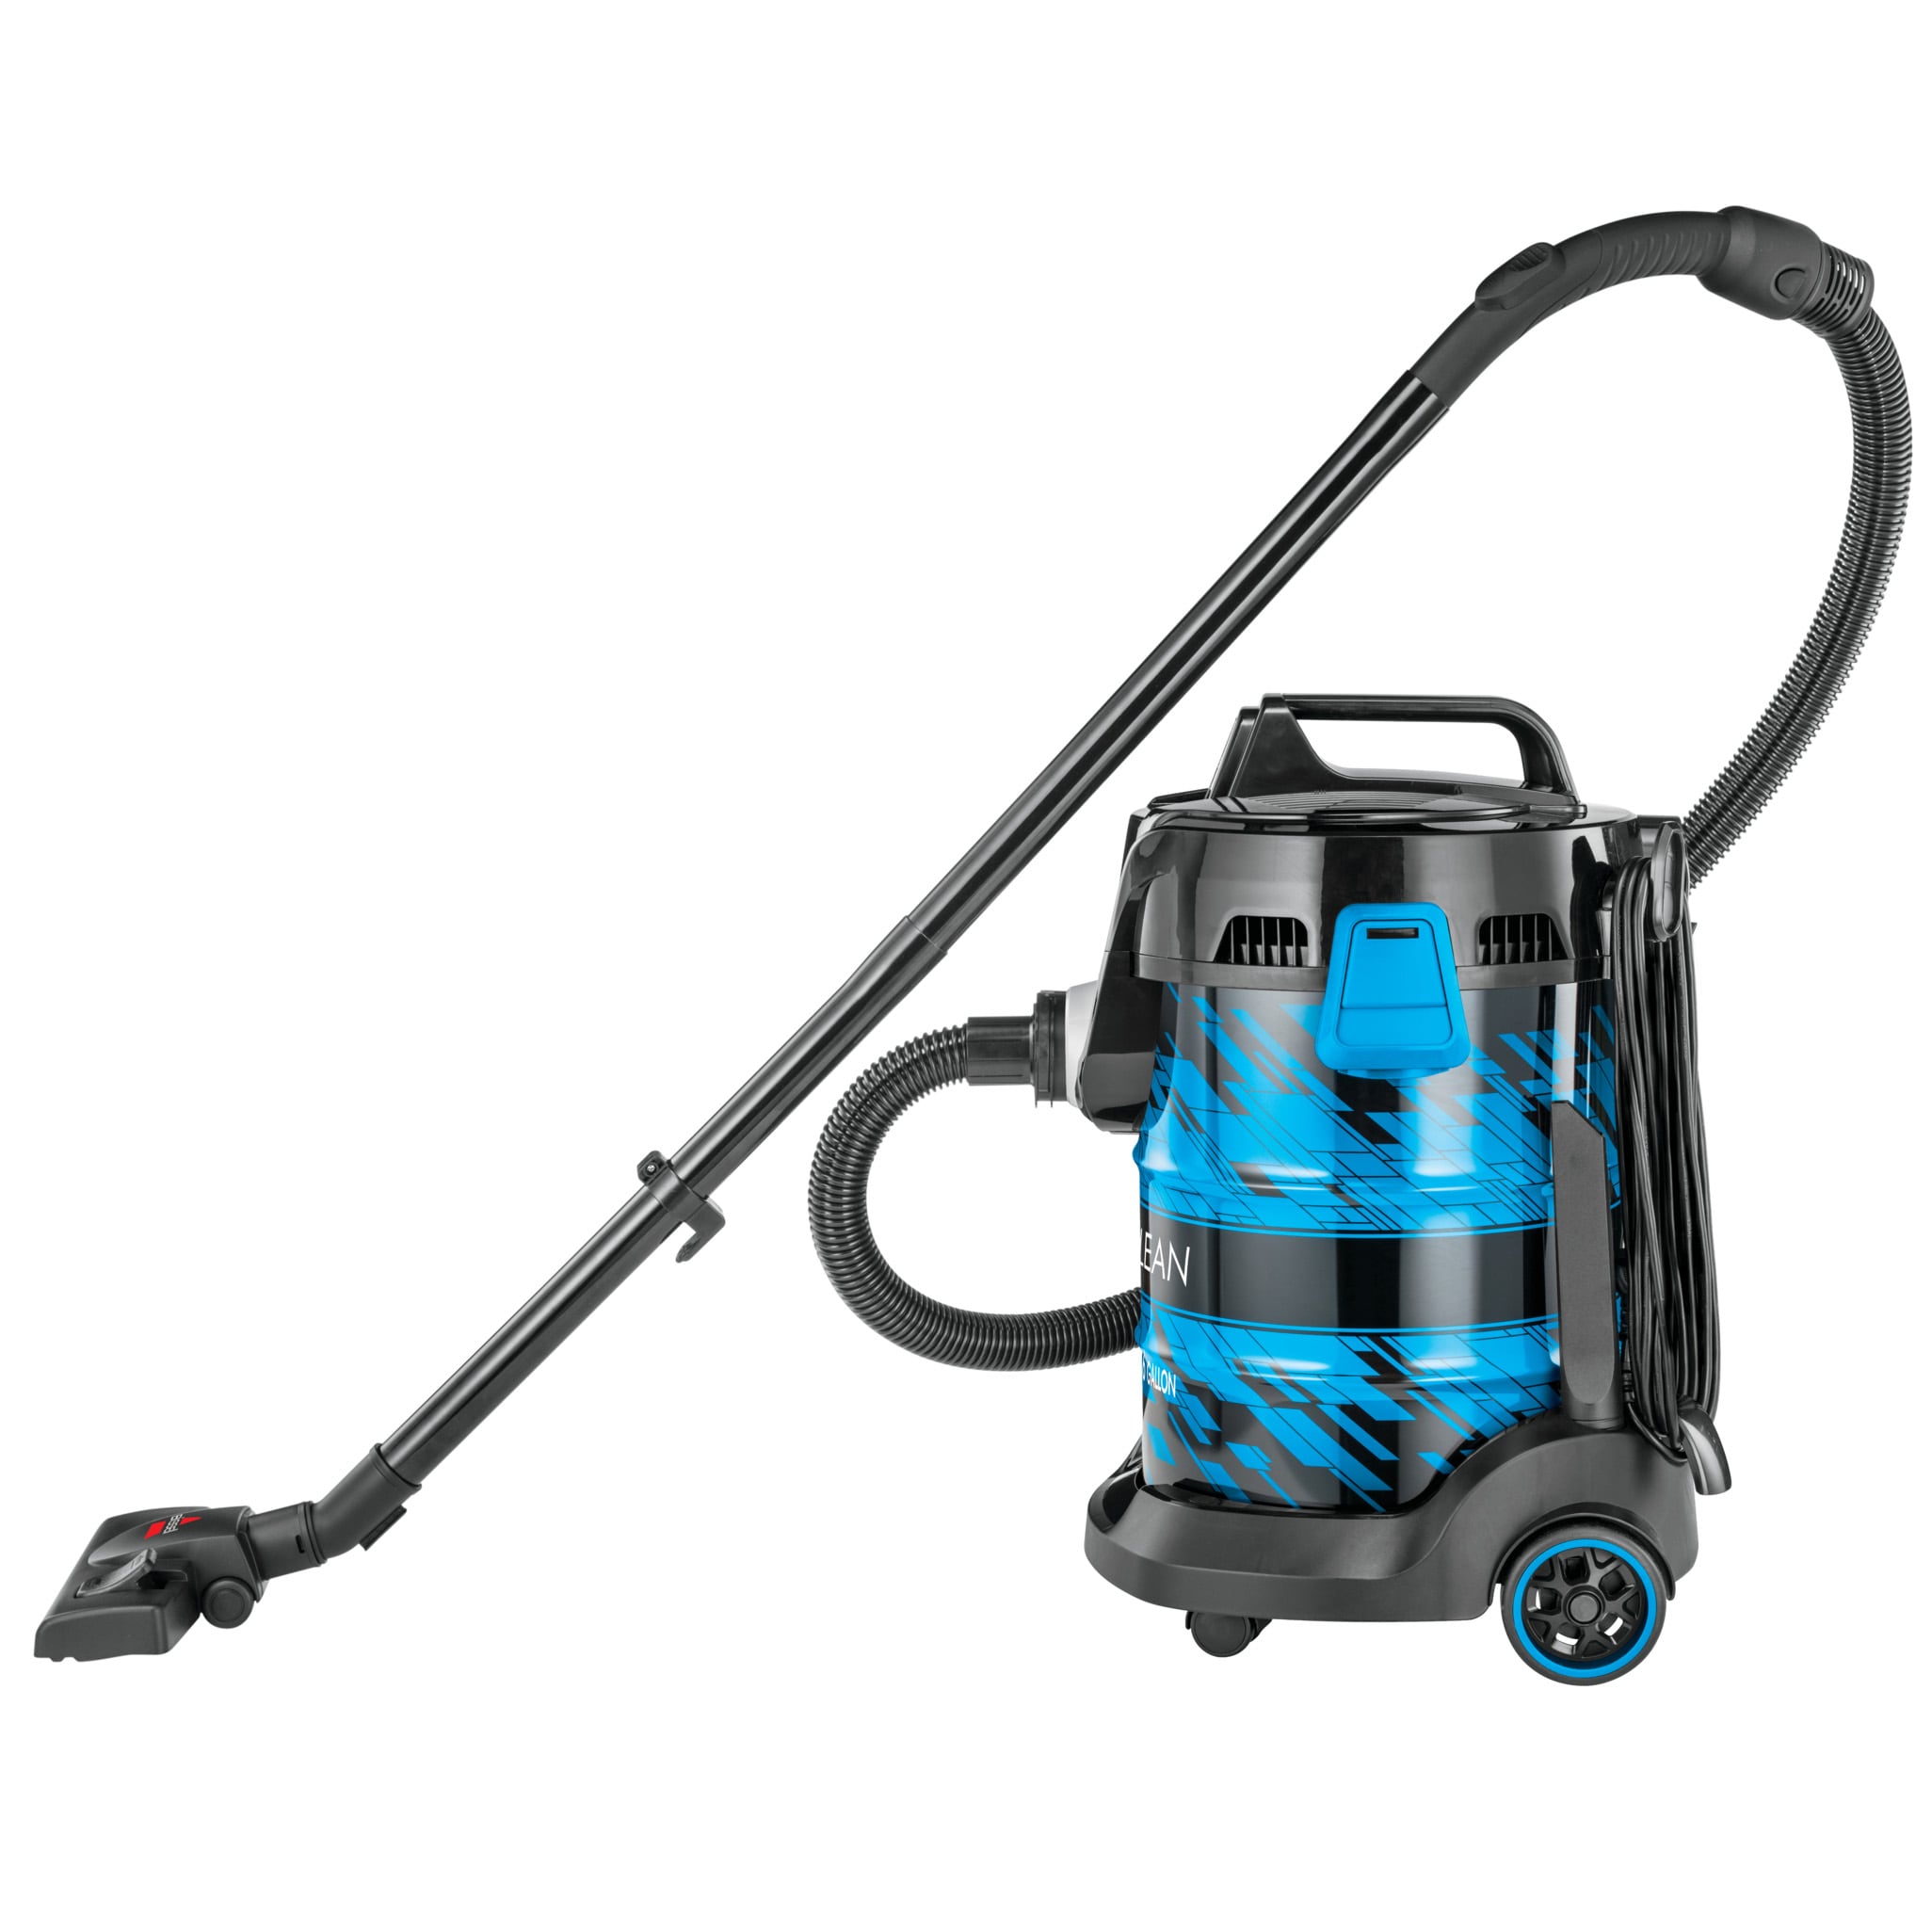 Bissell PowerClean Review: Compact carpet cleaning